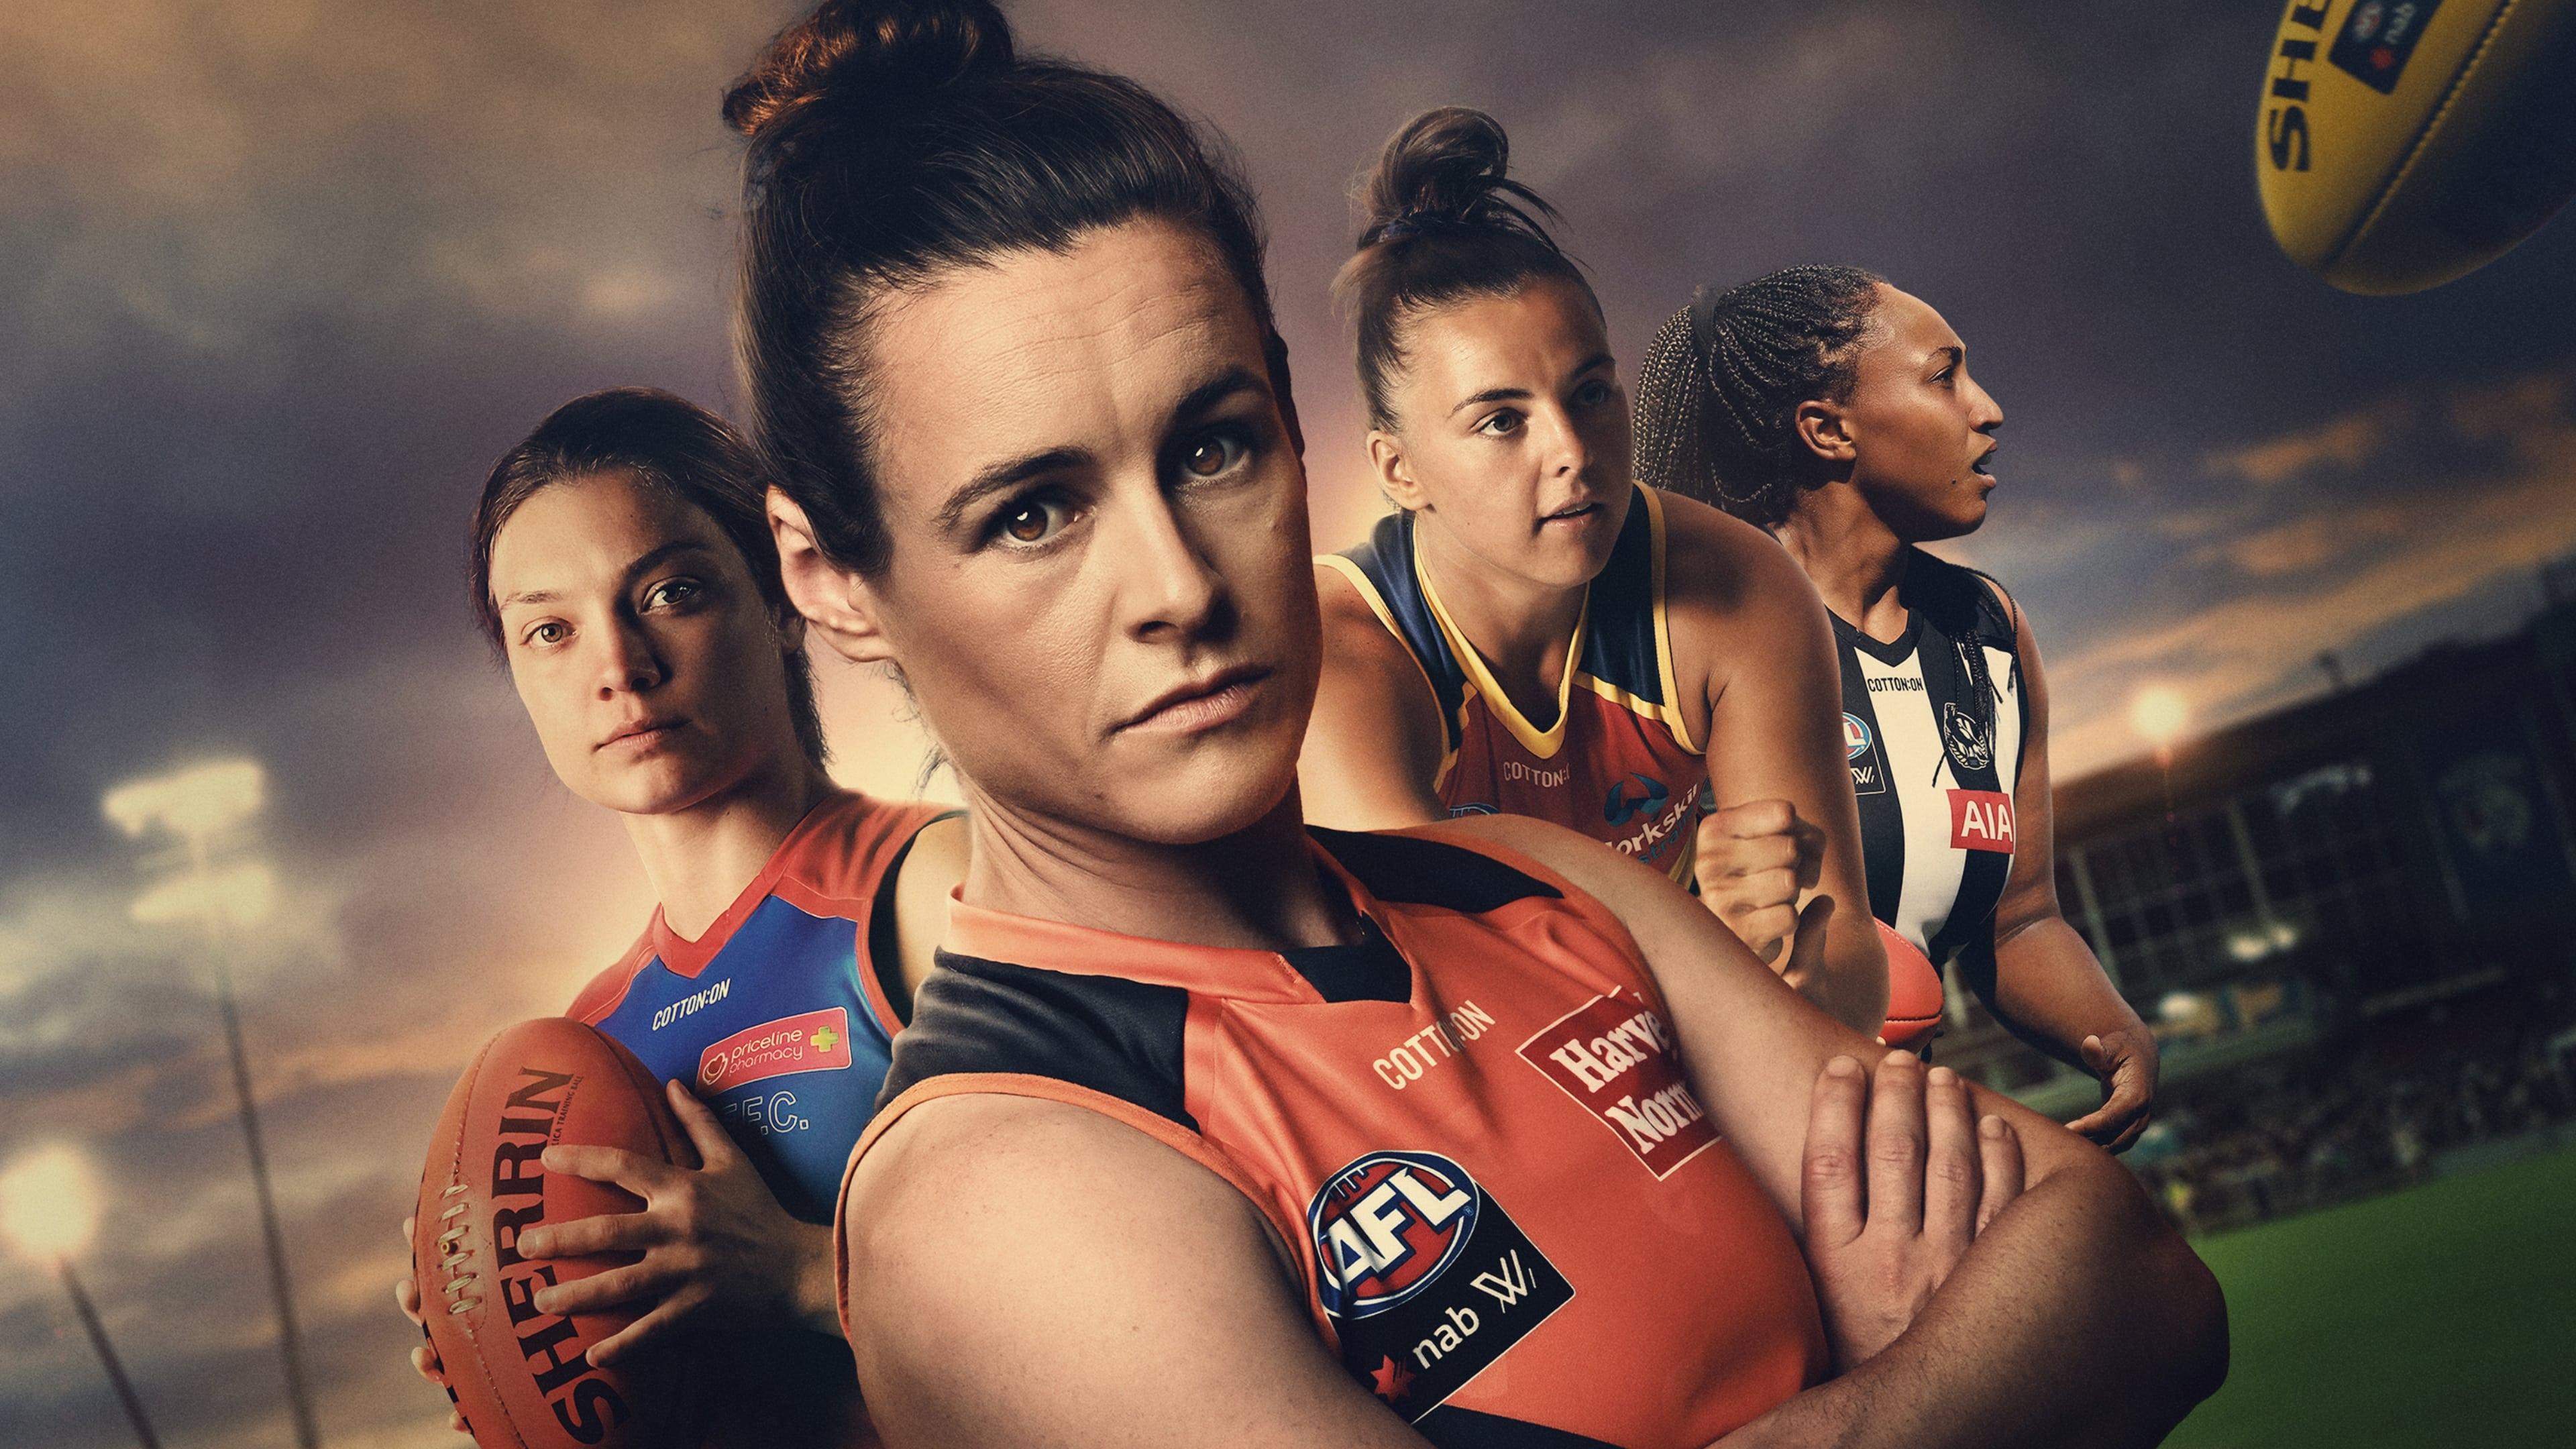 Fearless: The Inside Story of the AFLW backdrop